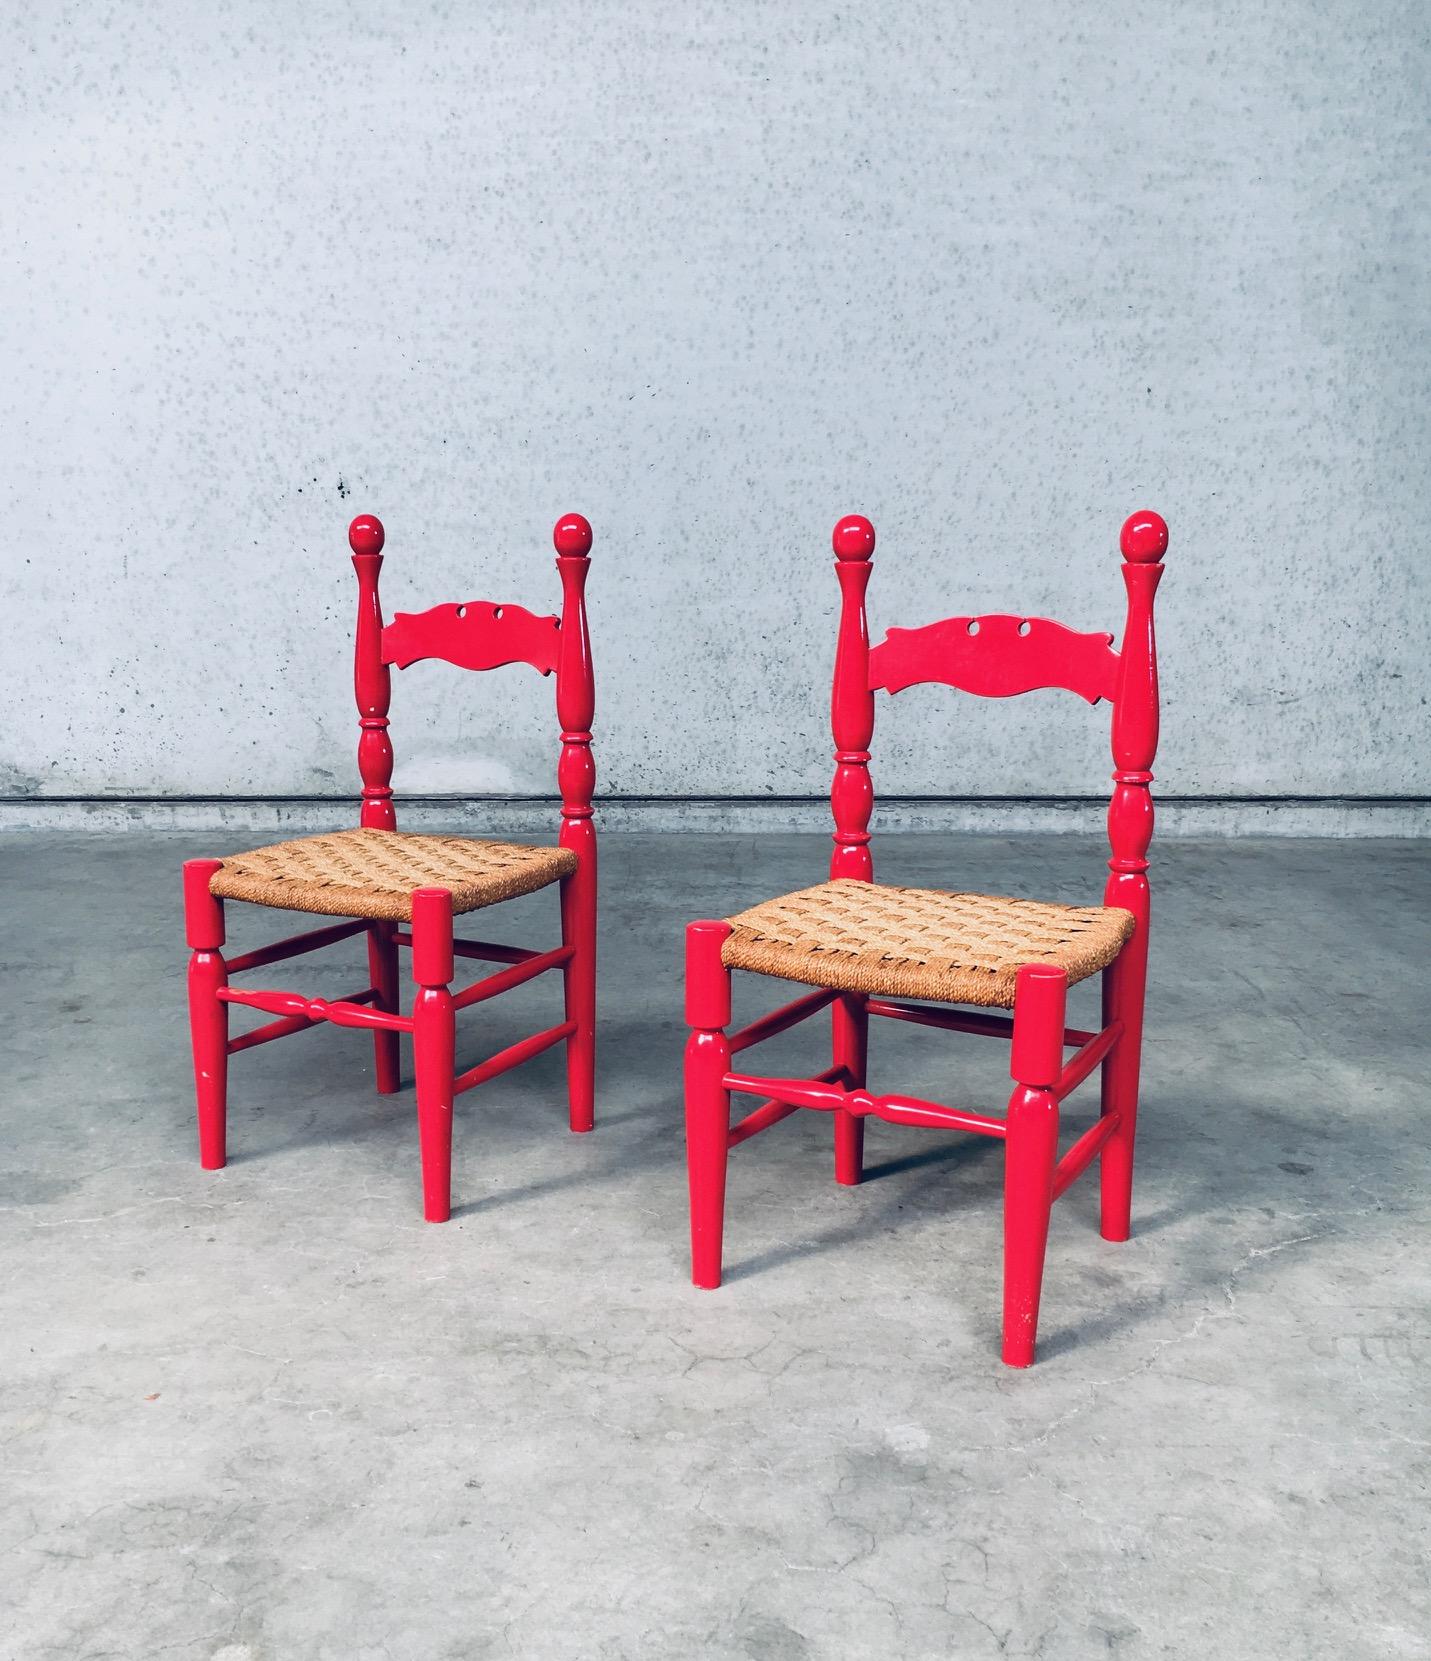 Vintage Scandinavian Country Style Design Red Lacquer and Rope Side Chair set of 2. Made in Sweden, 1960's period. High gloss red lacquered frame with woven rope seat. Turned and carved beech wood constructed chairs. These come in very good, all